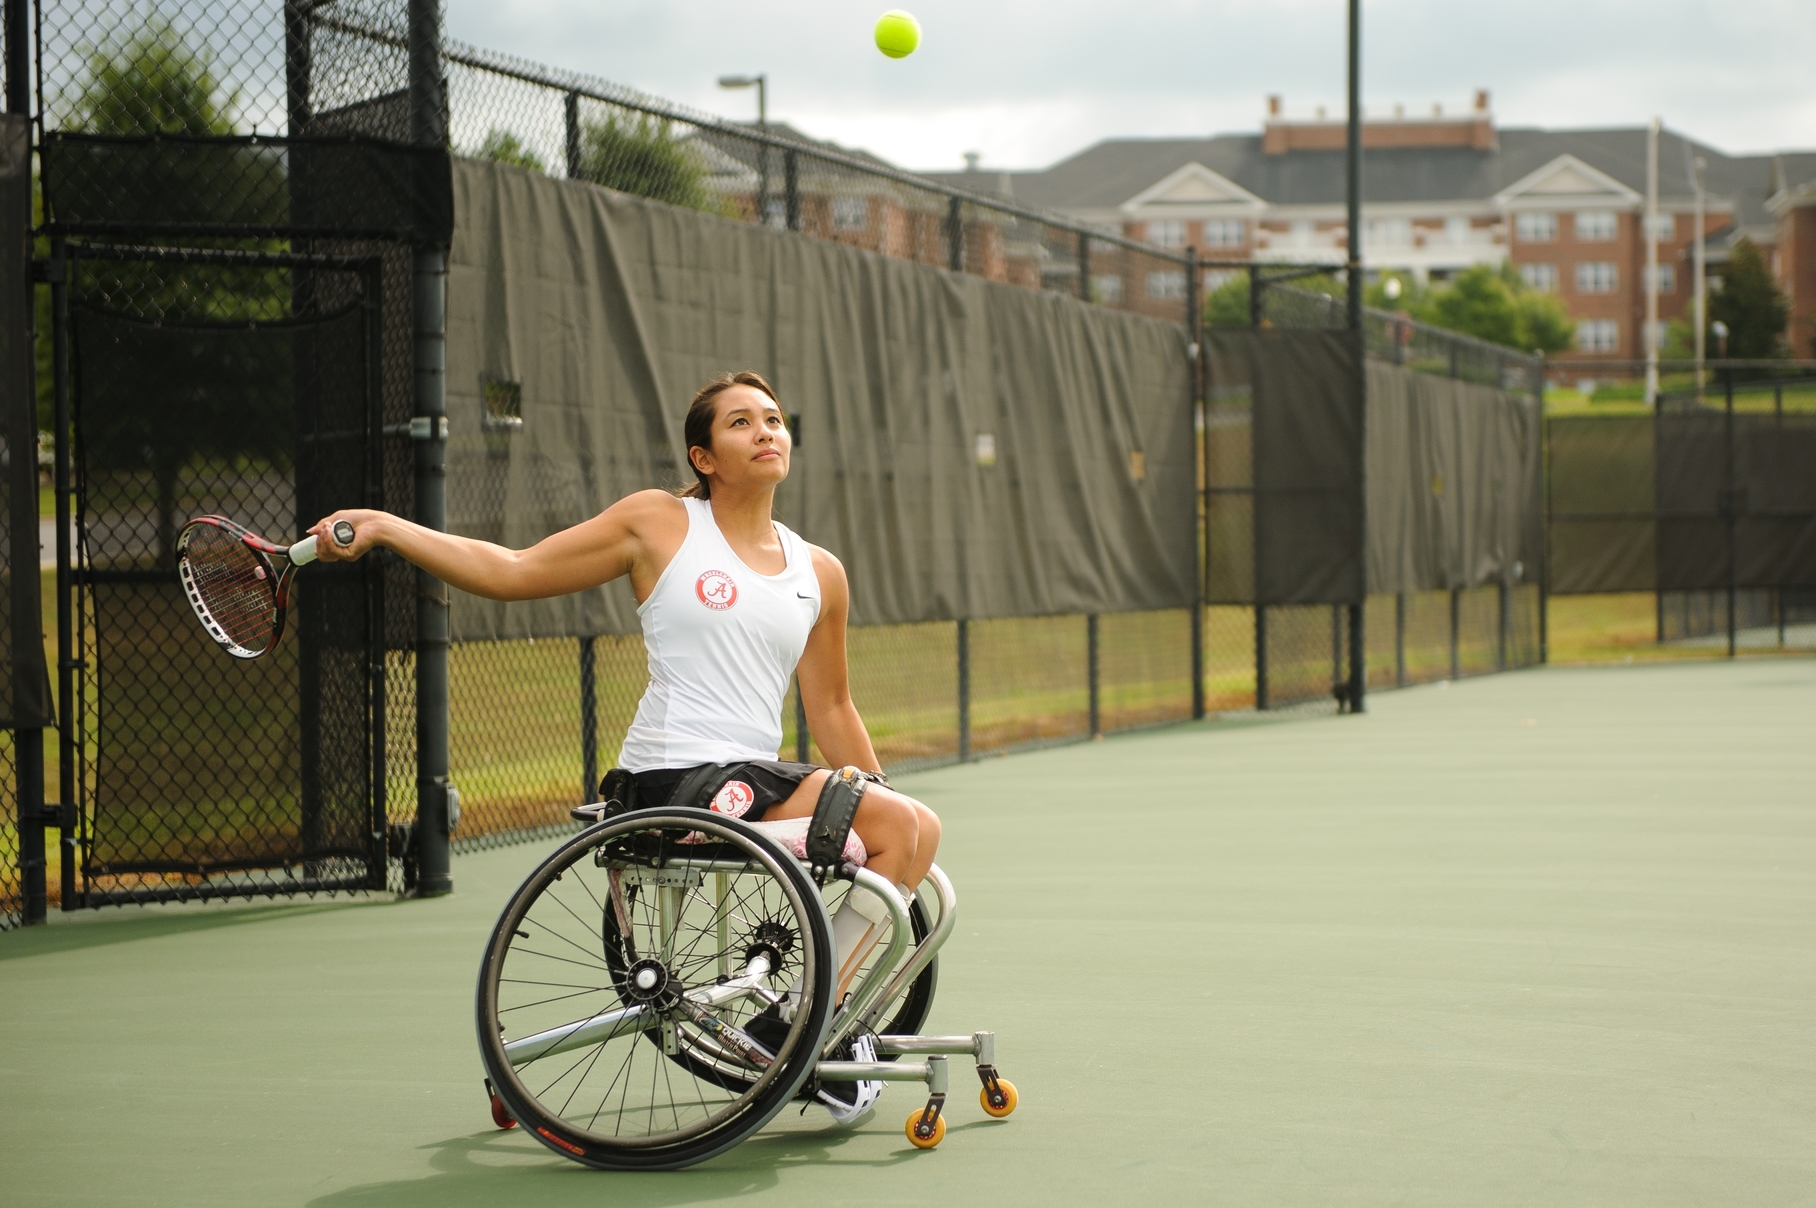 Student Tennis Champion Knows Meaning of Perseverance